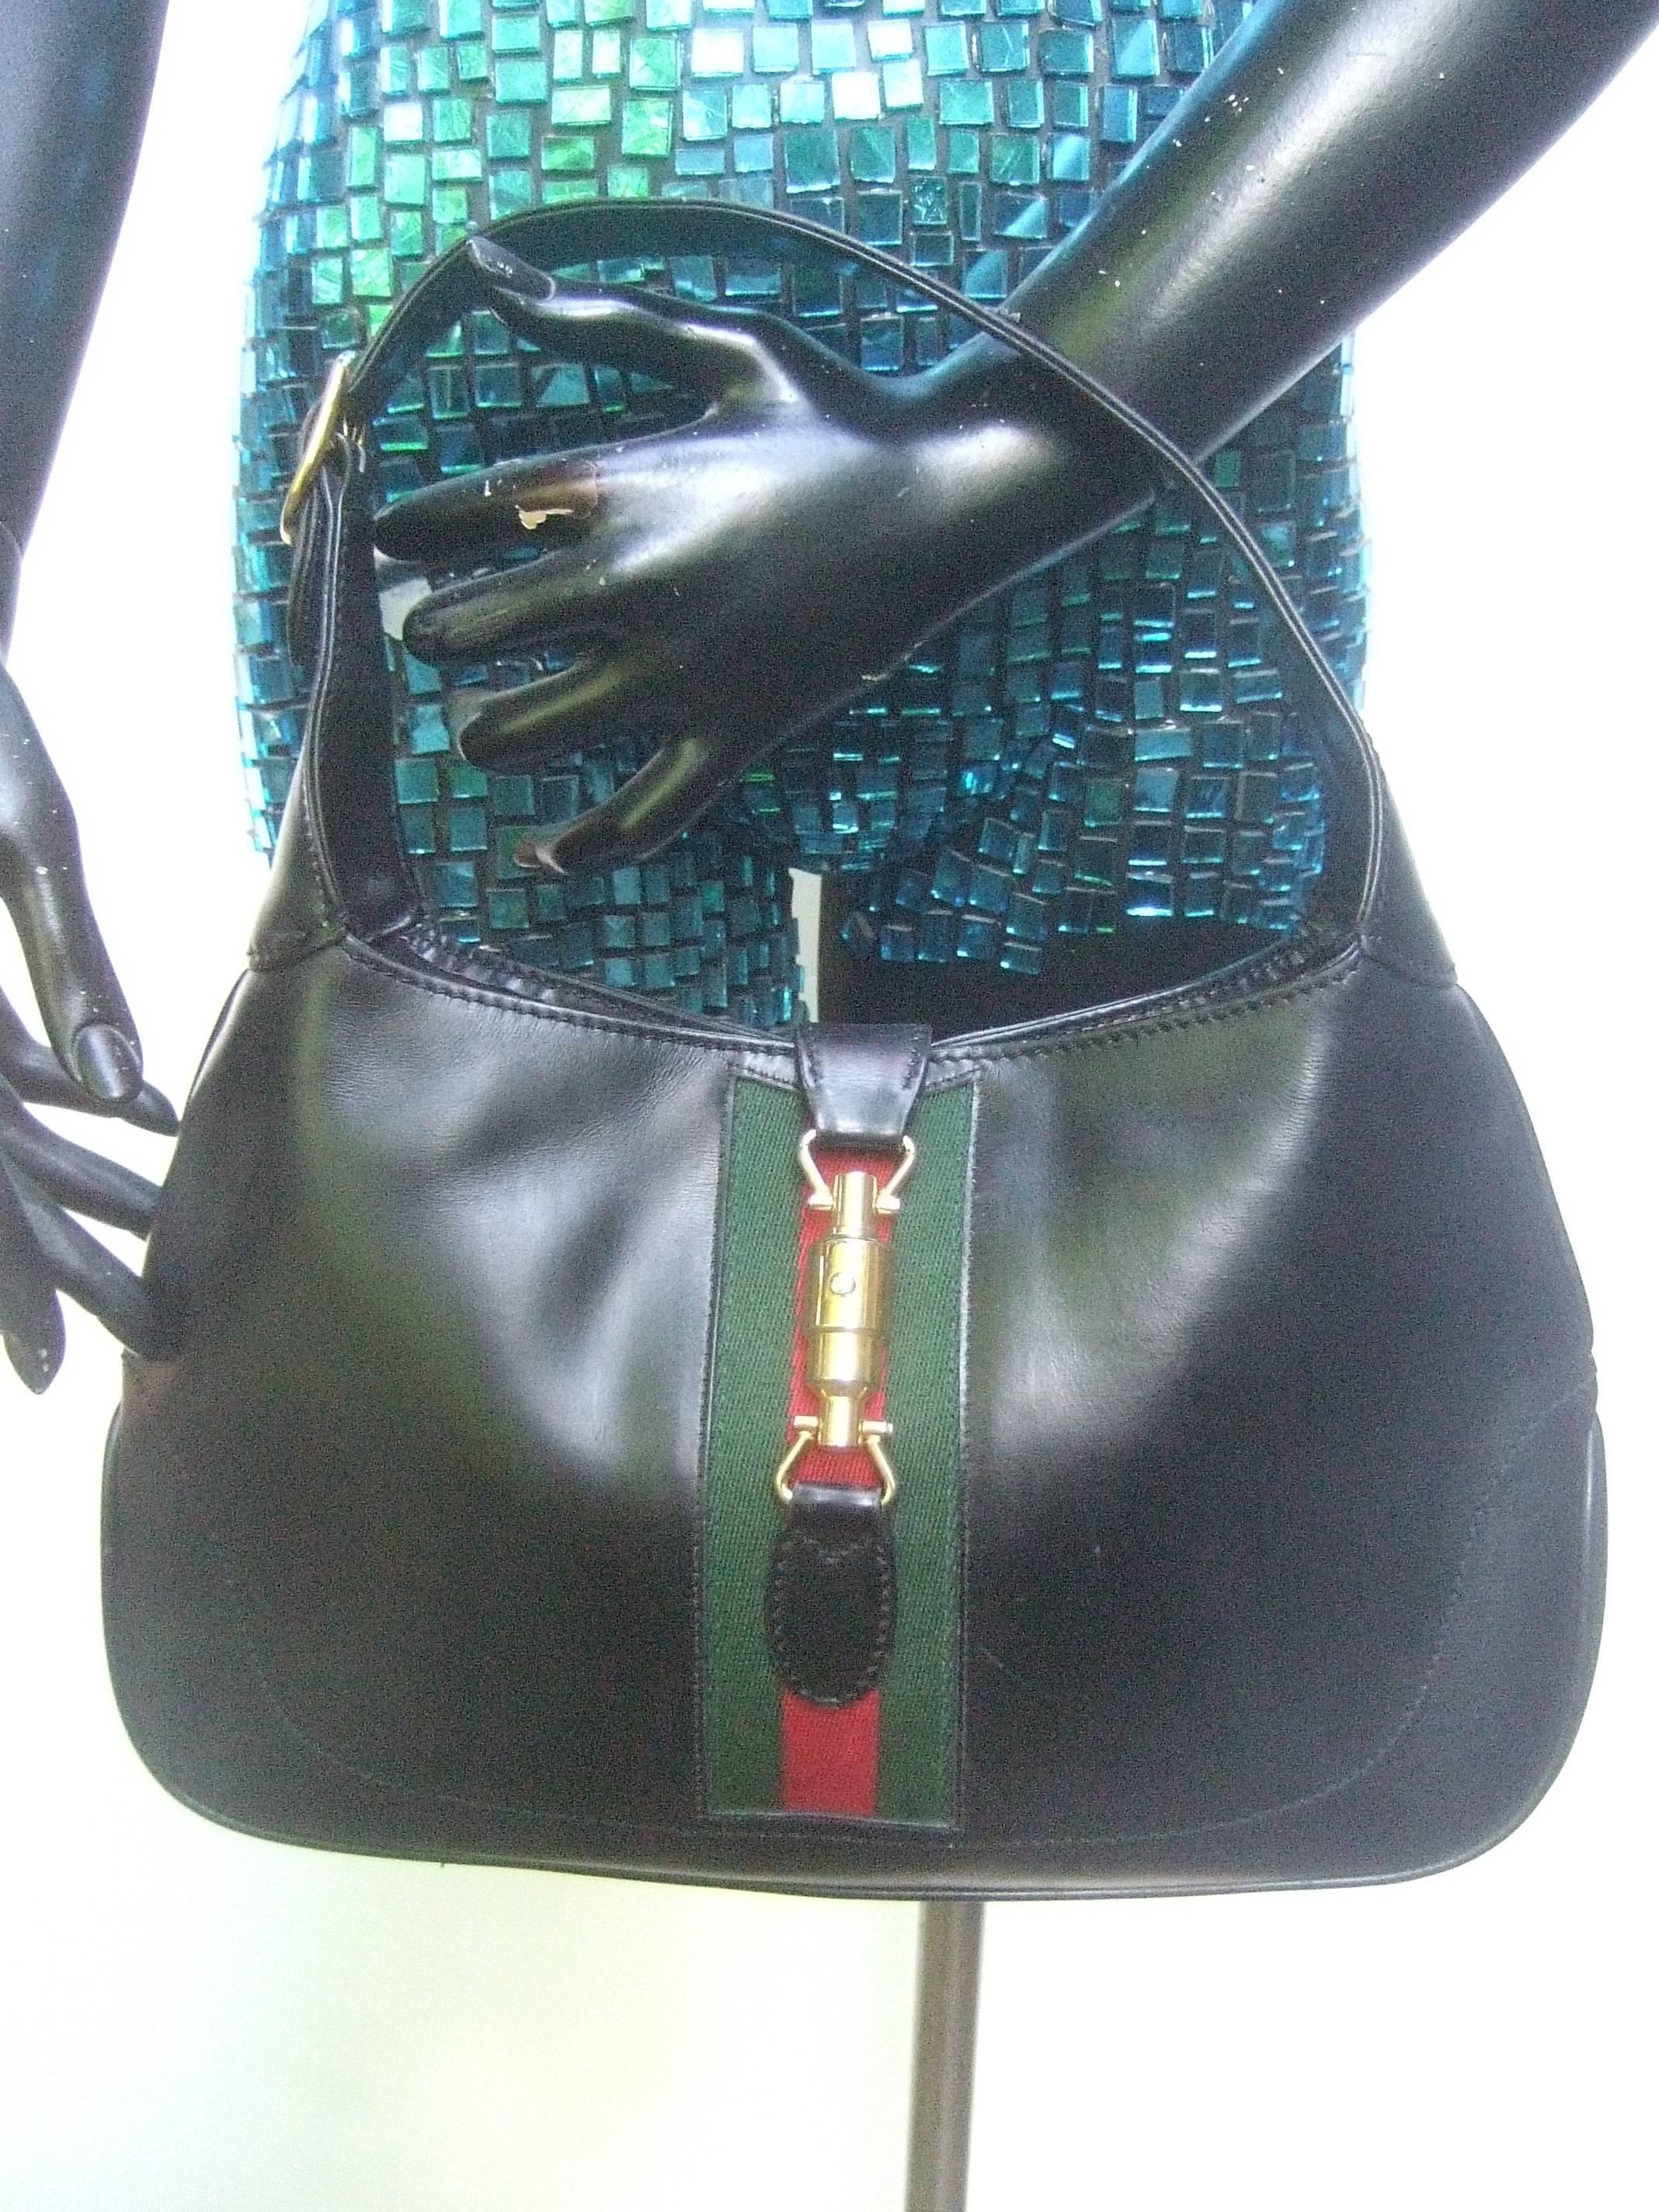 Gucci Italy Iconic ebony leather Jackie O piston handbag c 1970s
The classic Gucci handbag is covered with supple black
leather; designed with a sleek gilt metal piston clasp 
mechanism

Underneath the gilt metal piston clasp is Gucci's